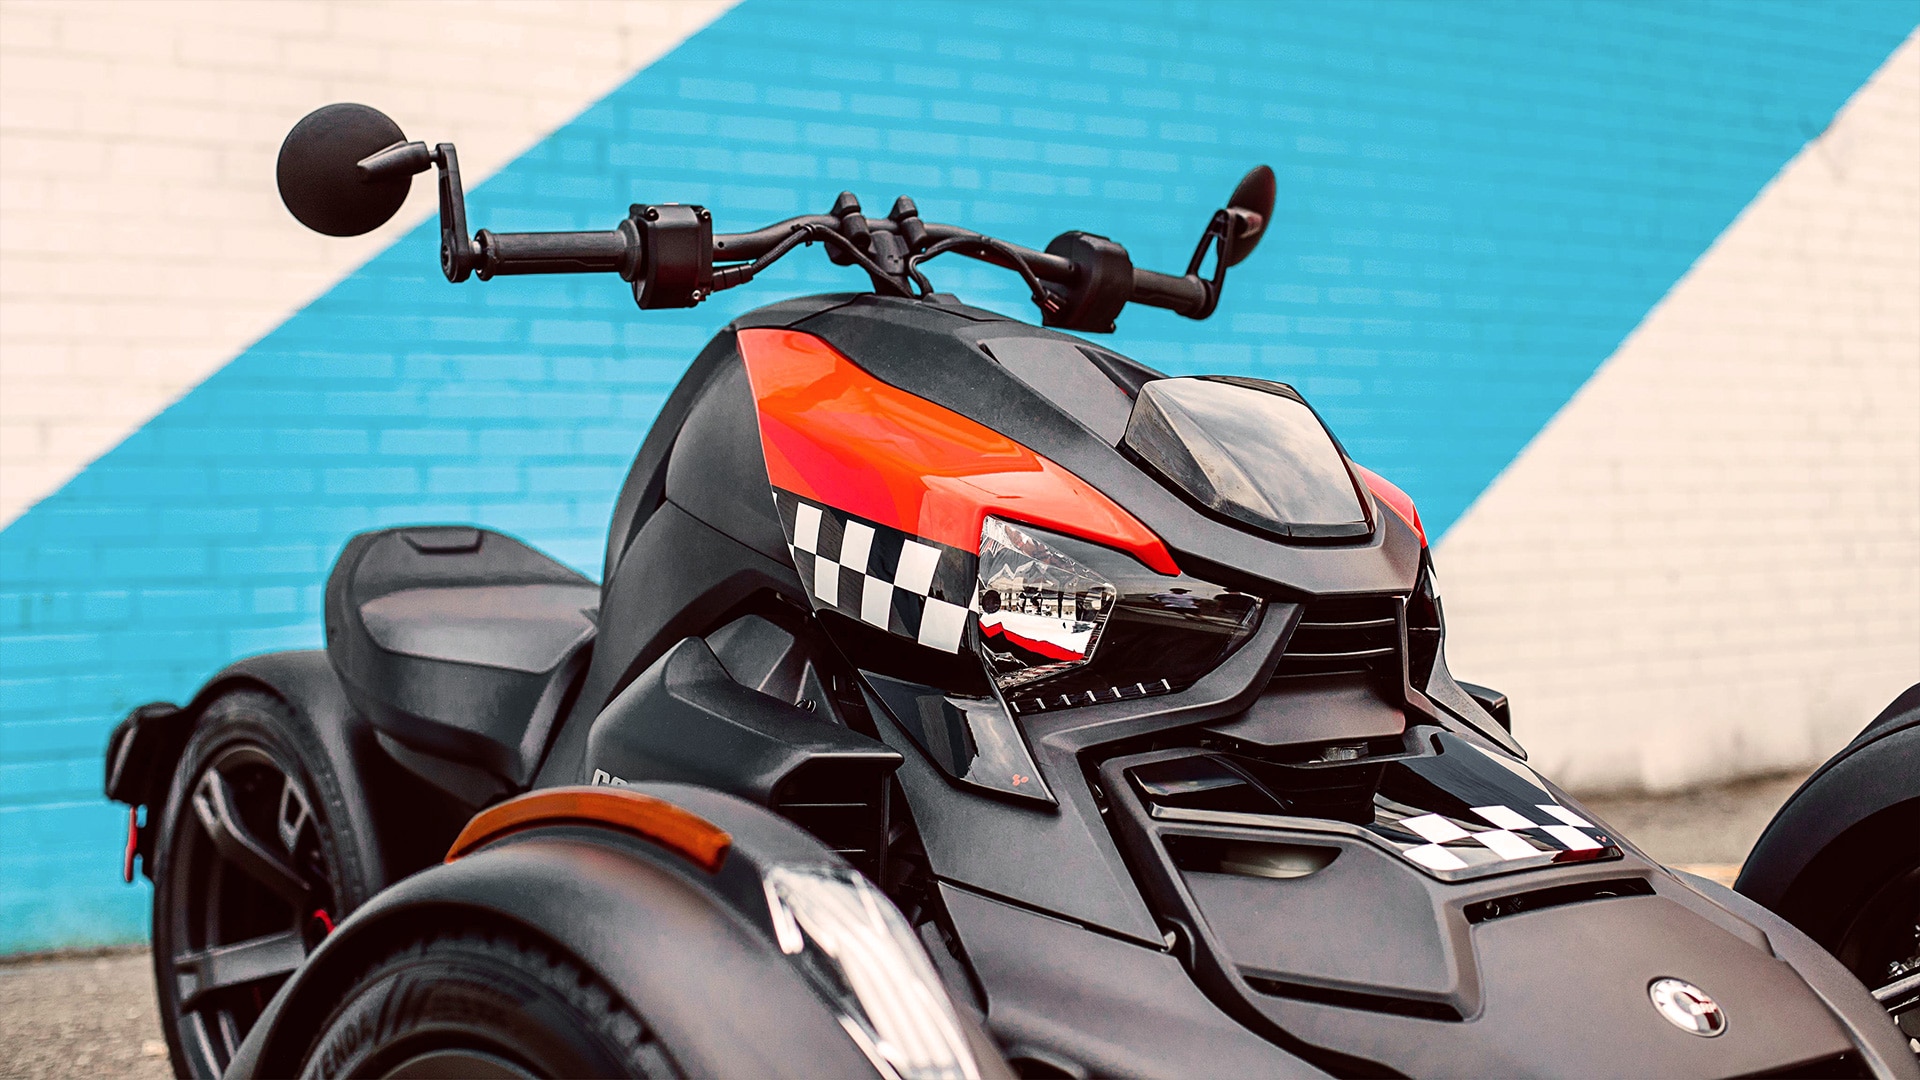 NEVER LEAVE HOME WITHOUT THESE MUST-HAVE 3-WHEEL MOTORCYCLE ACCESSORIES